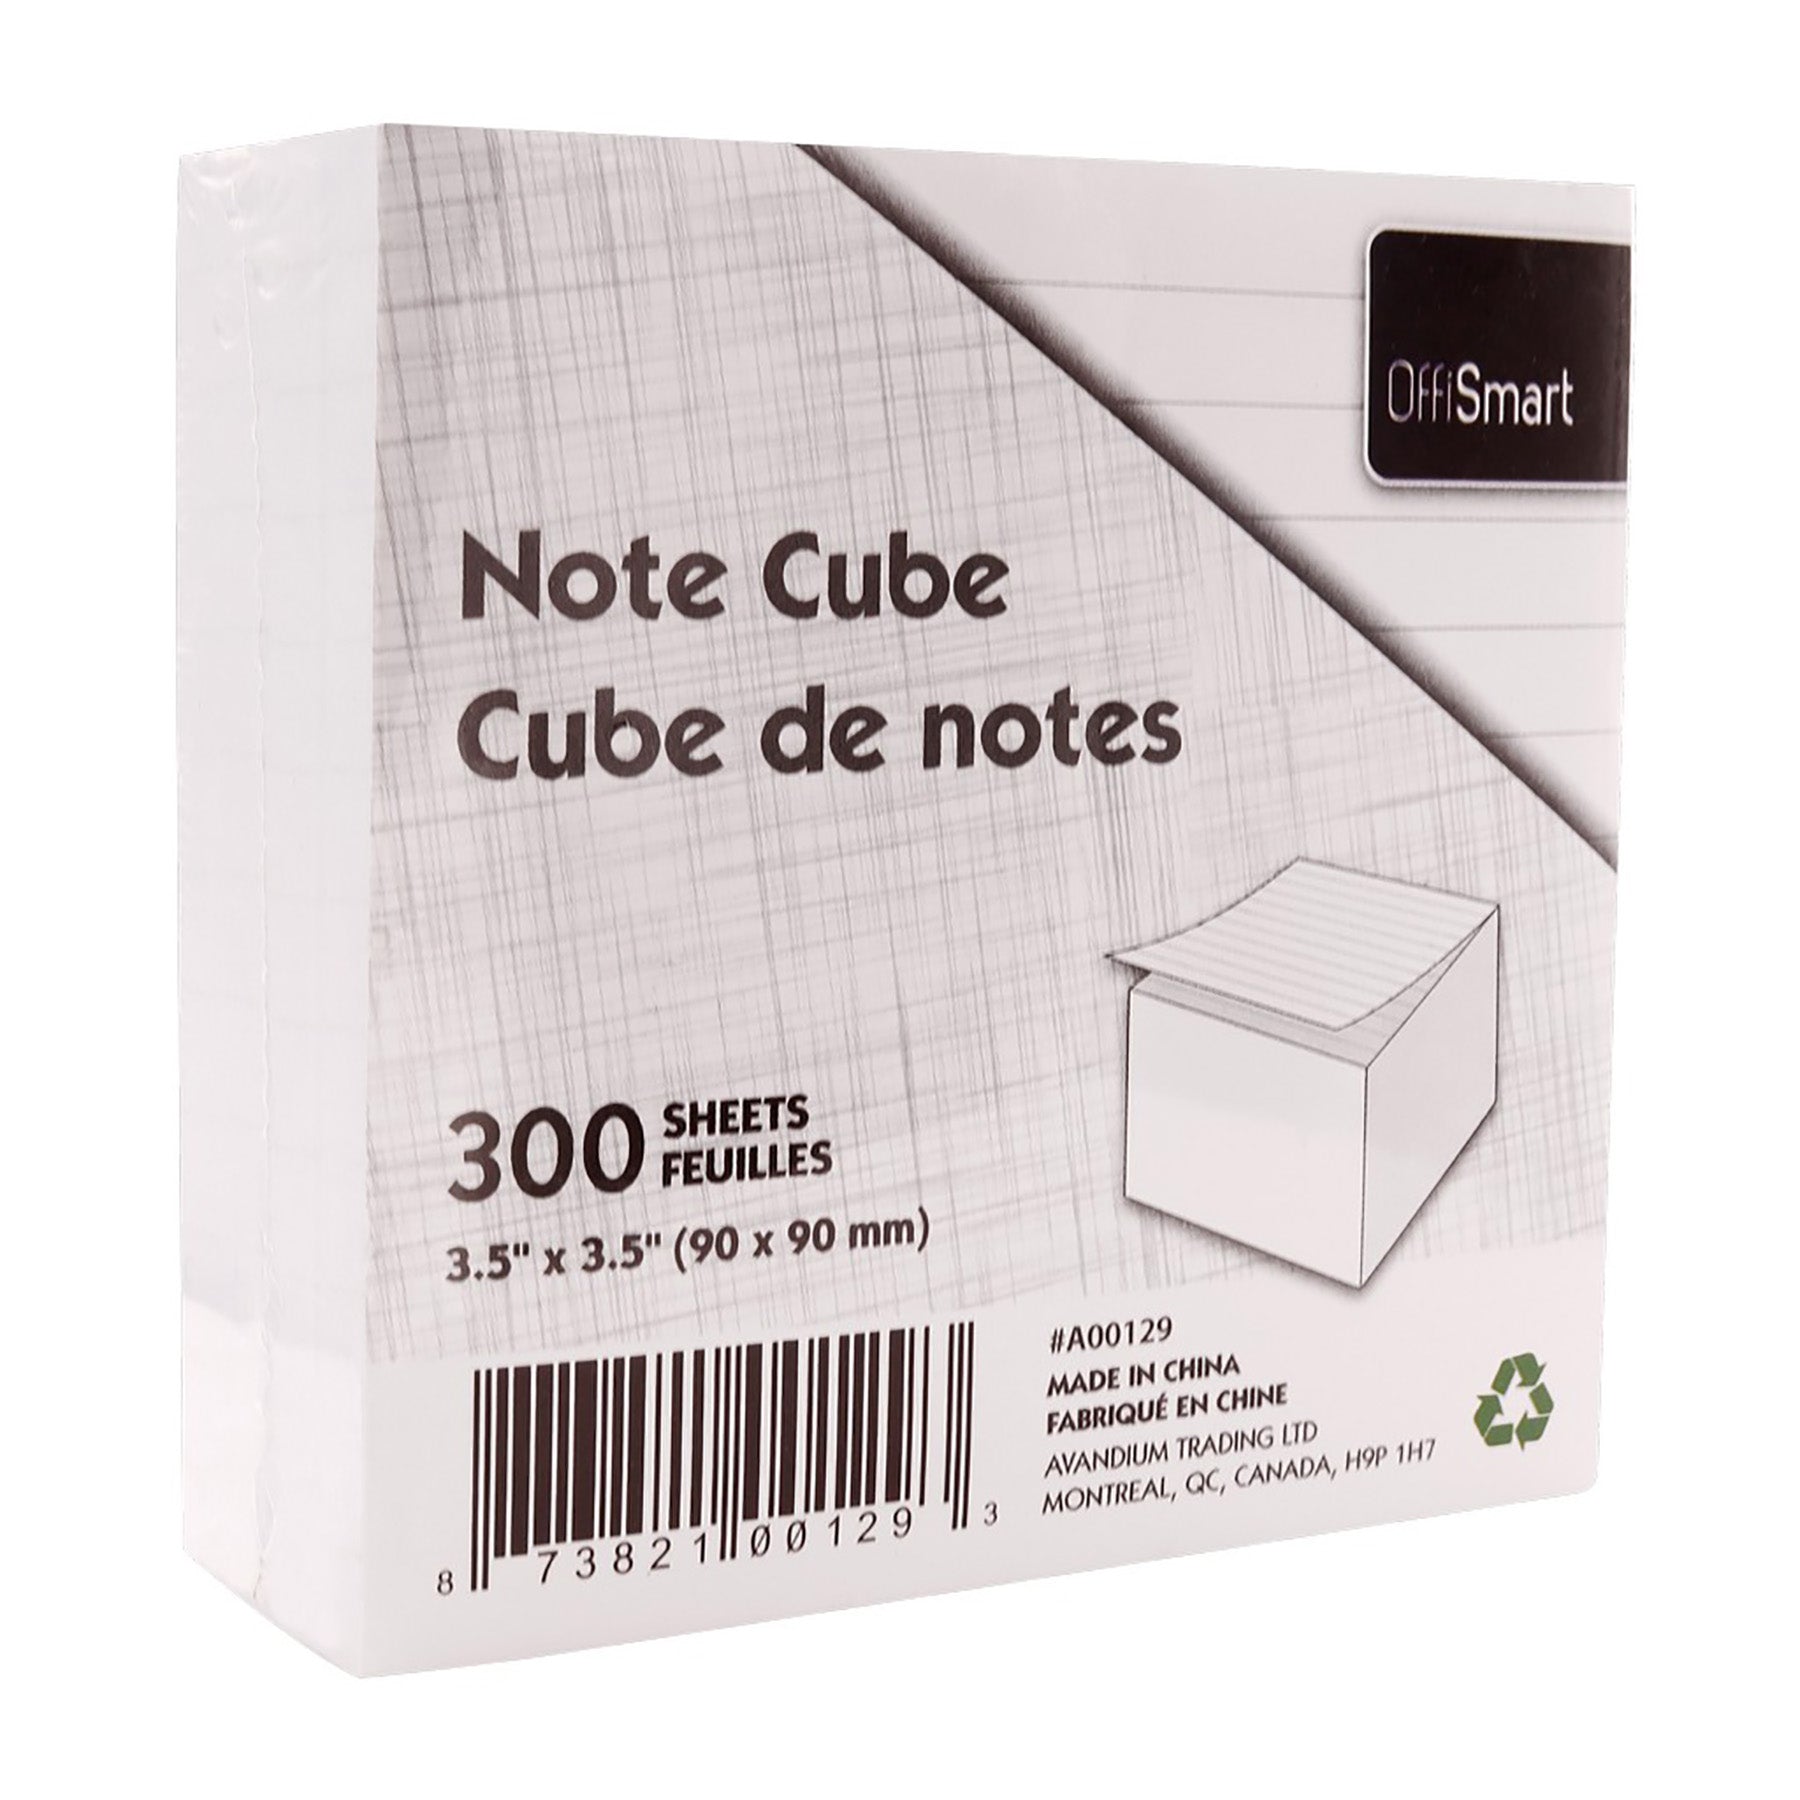 Offismart Paper Cube White 300 Lined Sheets 3.5x3.5in